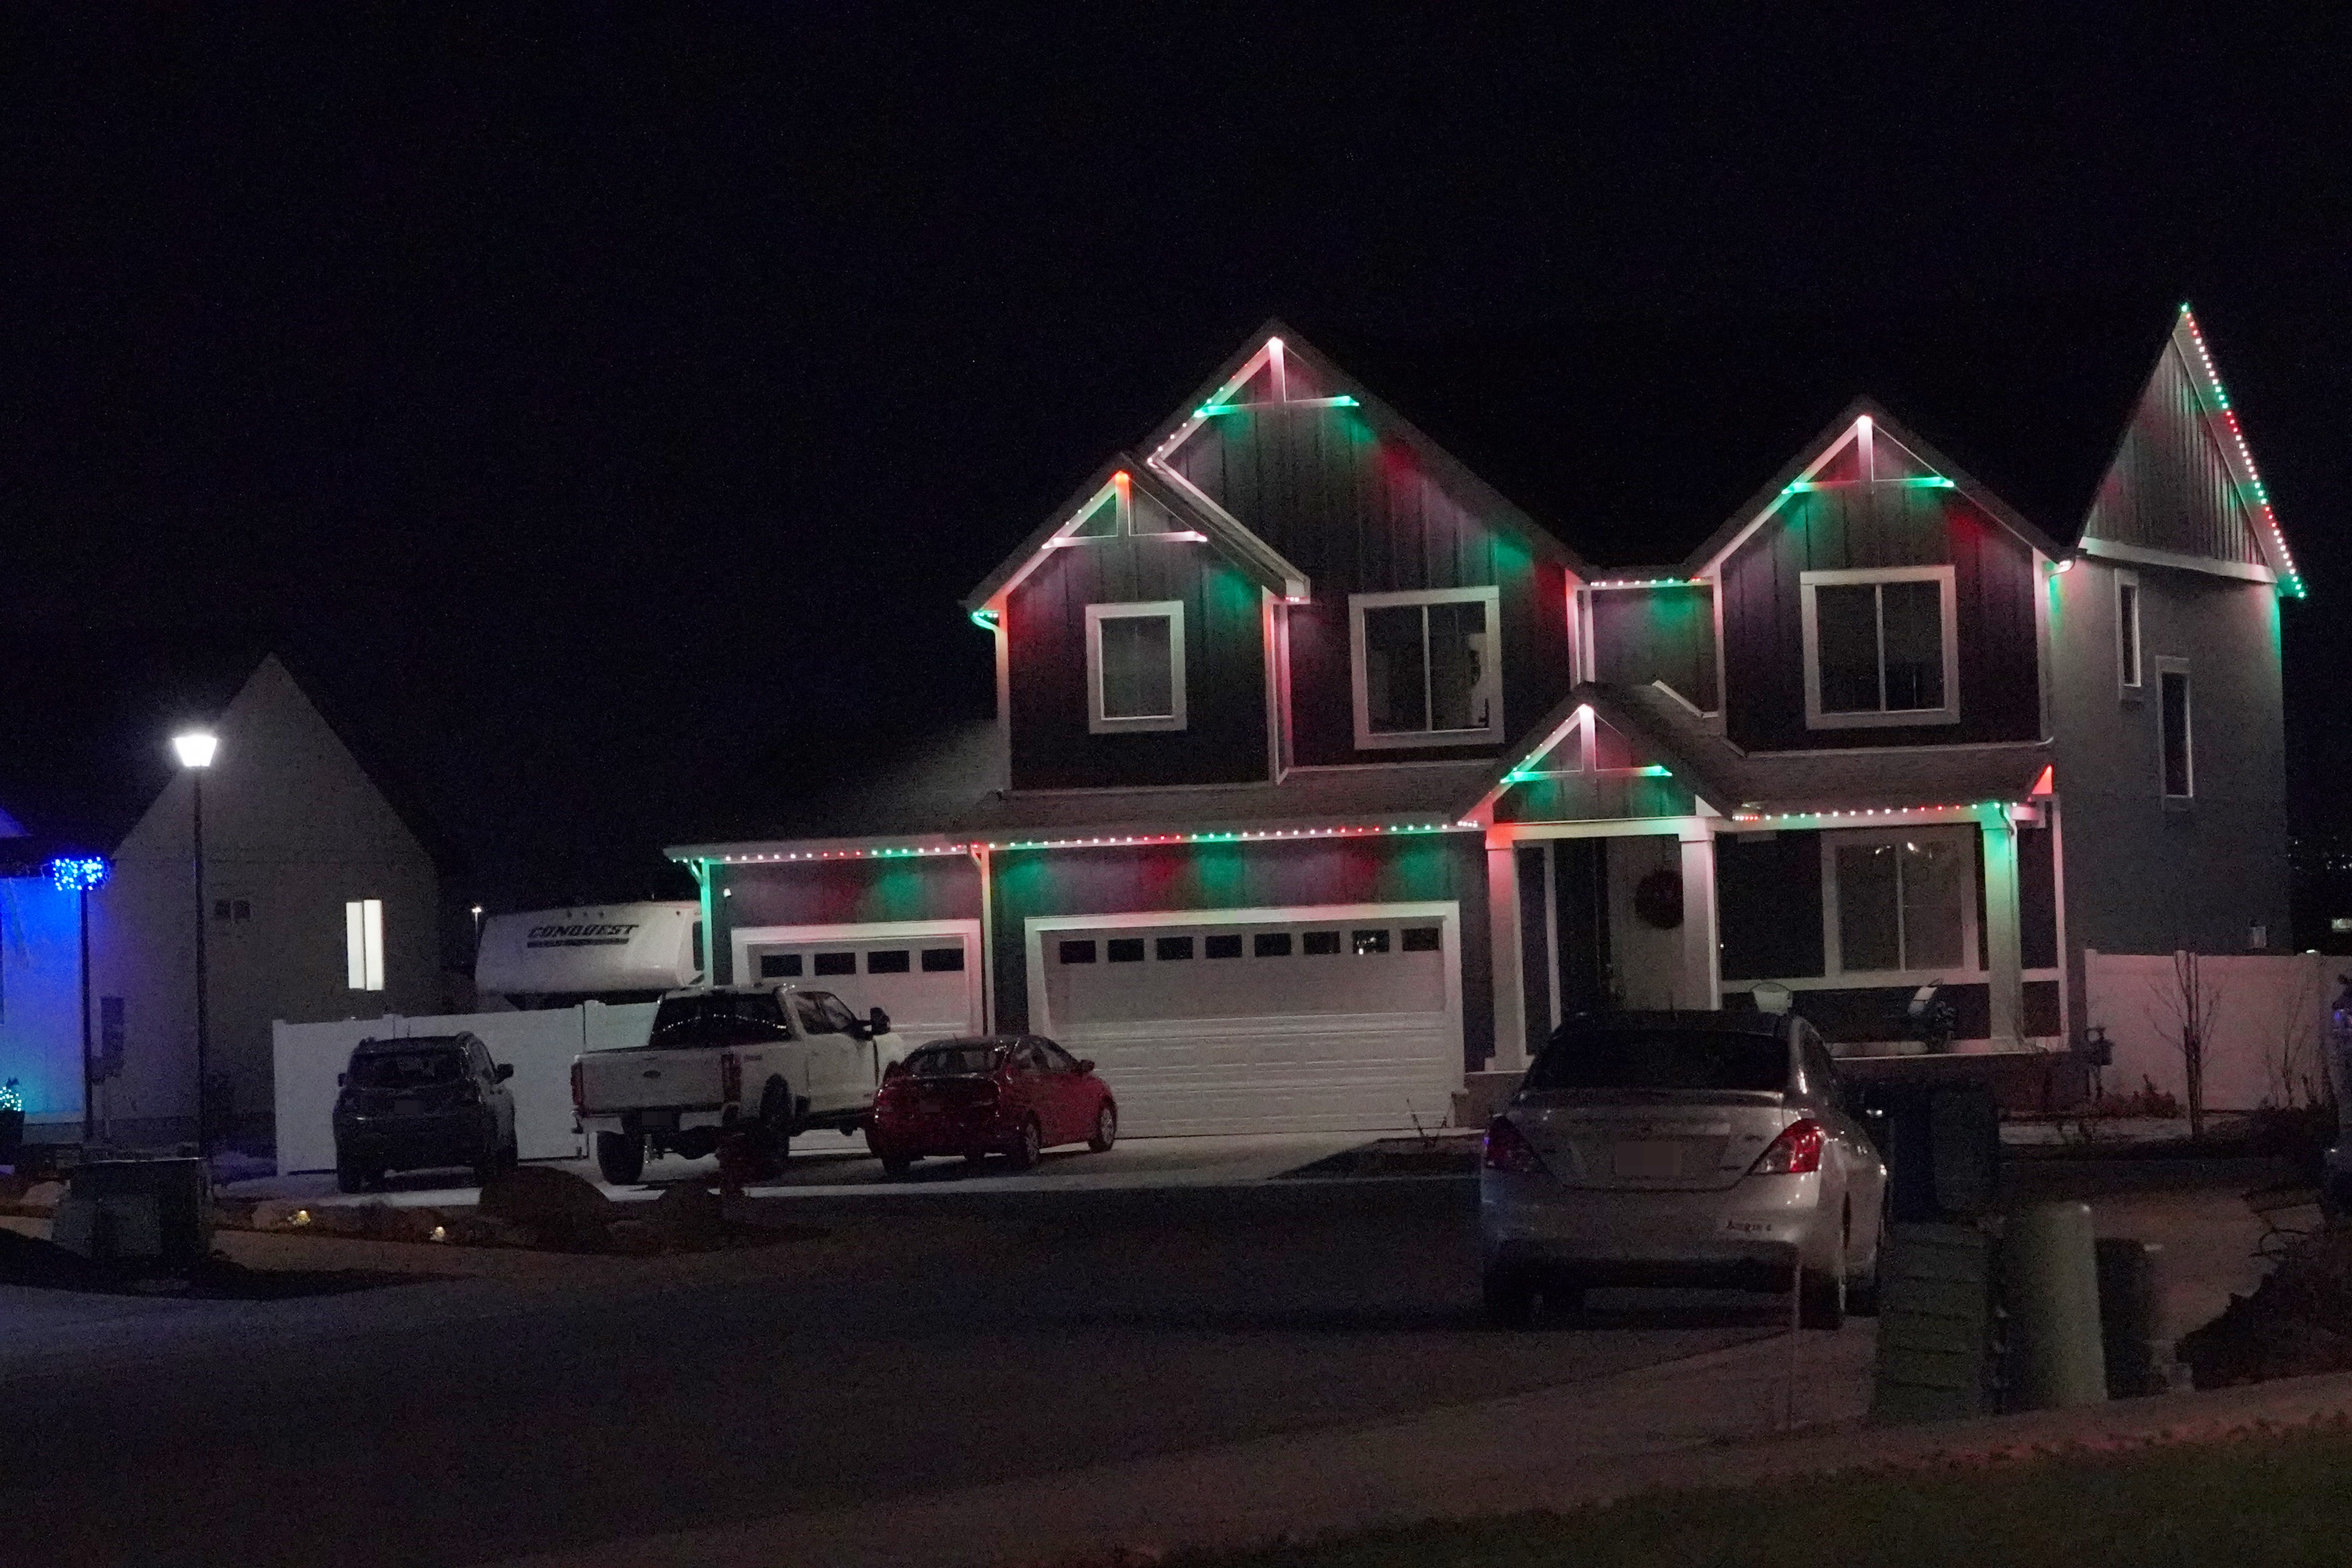 Christine and David completed their outing by returning to their Utah home which was decked out in Christmas lights